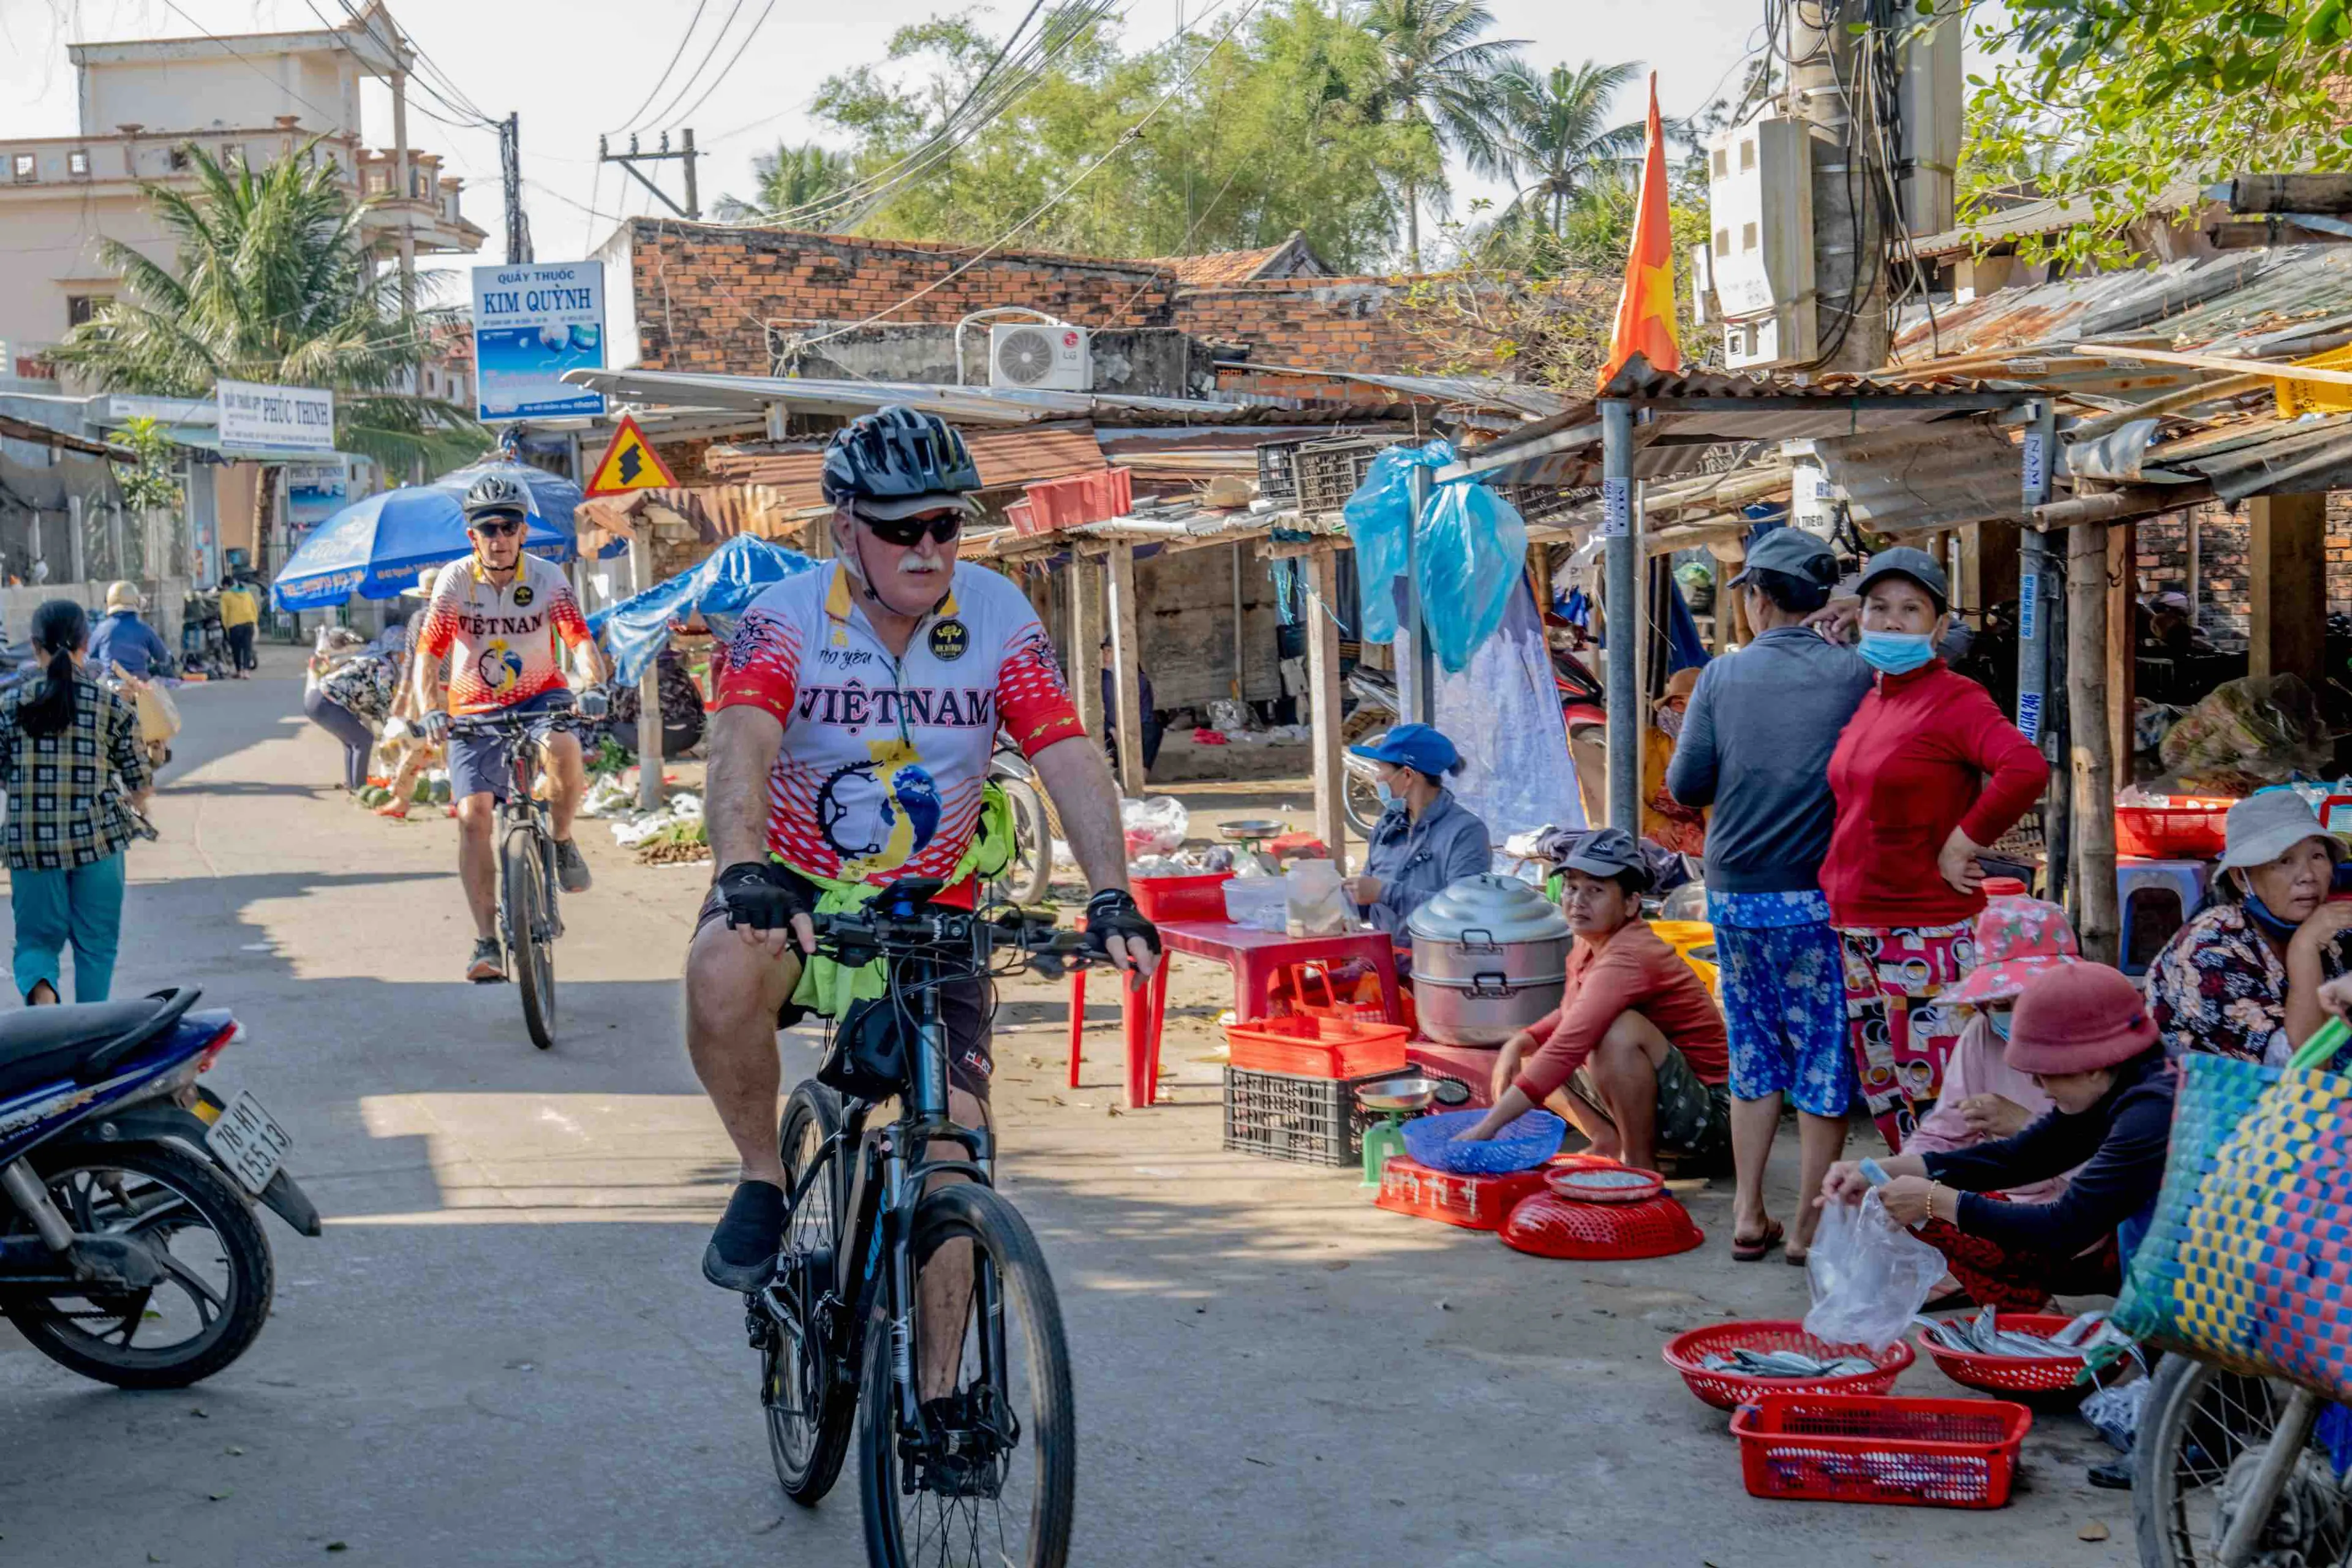 Our Route in Nha Trang is designed to bring out the best of this land to riders - no traffic and all local exeperiences